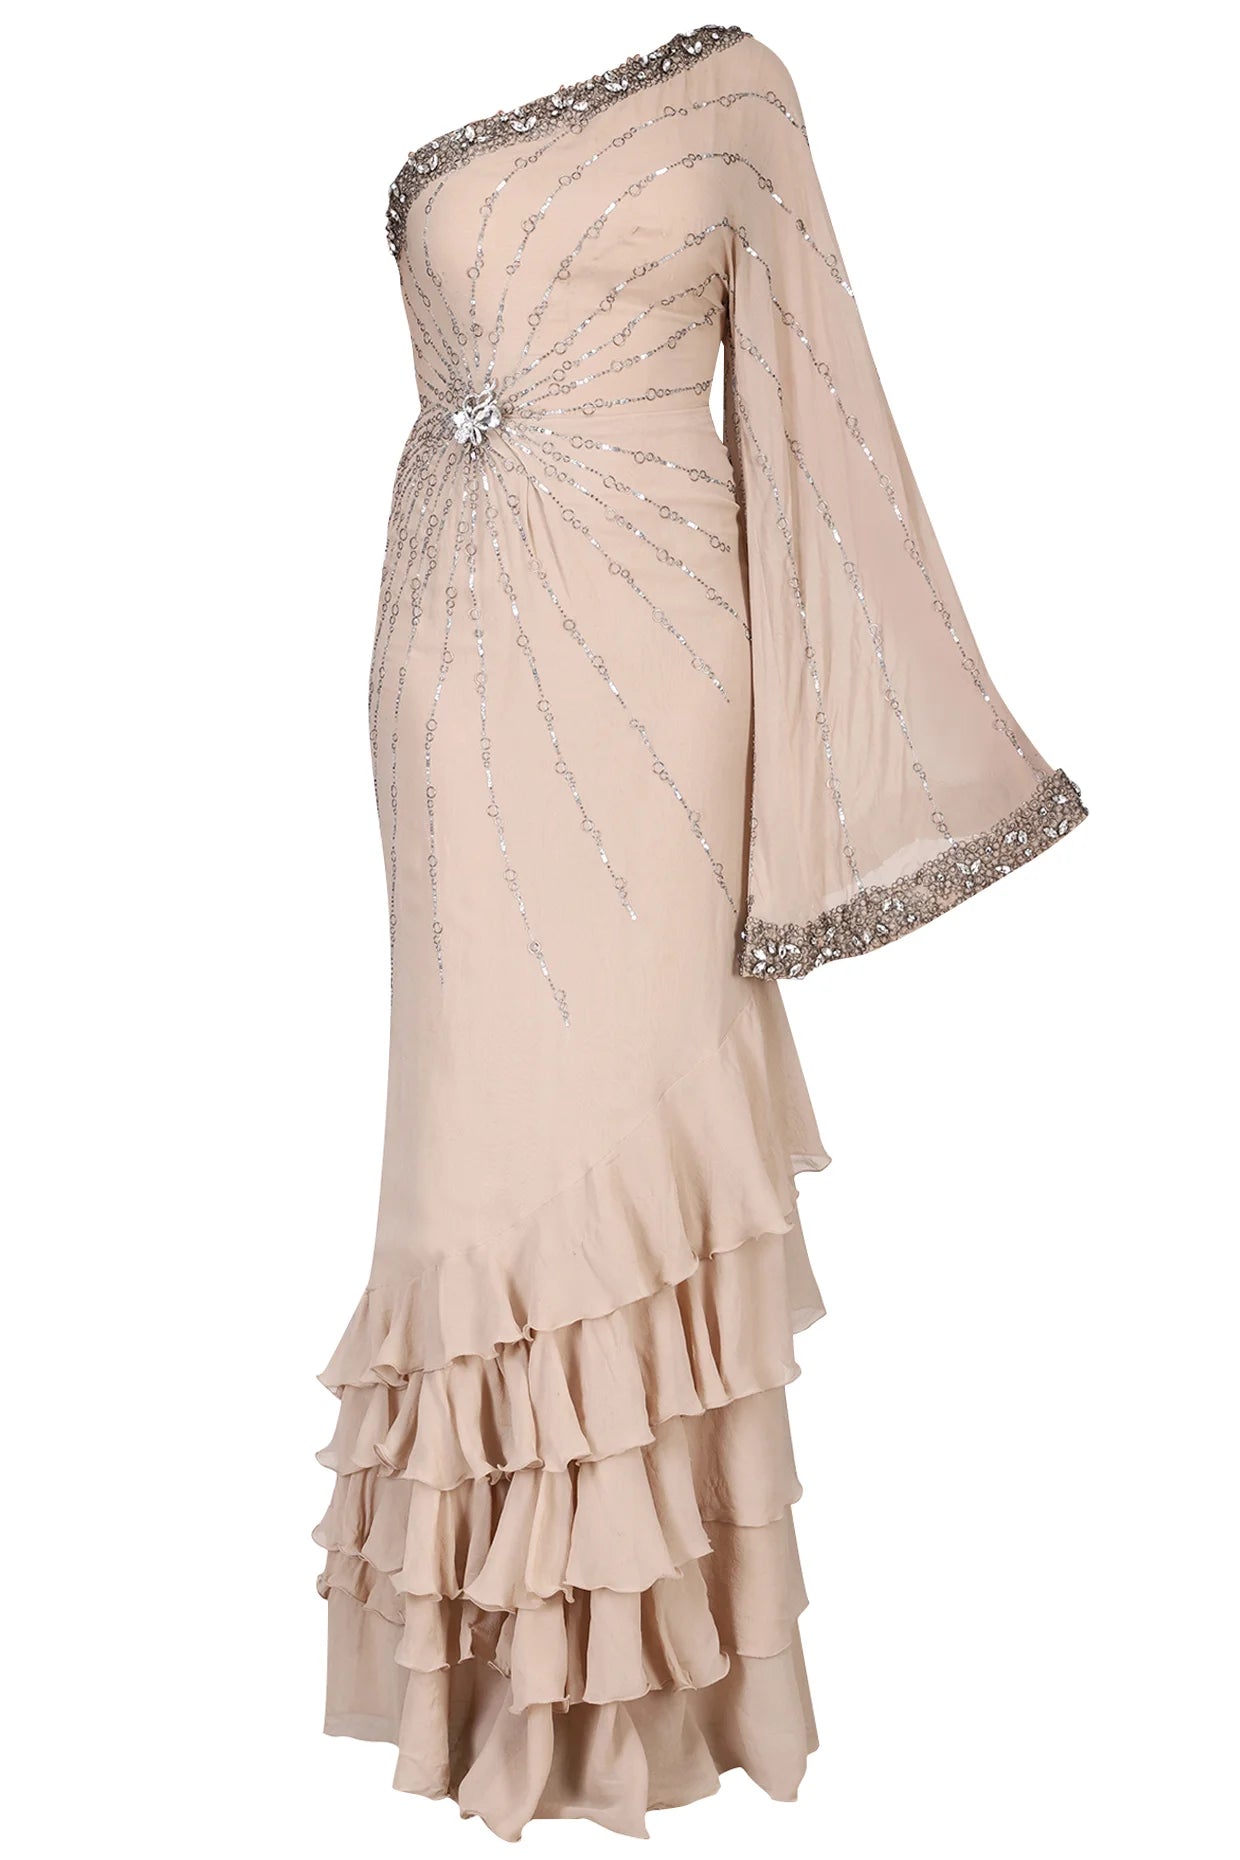 Beige Saree Gown With One Shoulder Drape Moroccan Inspiration Silk Chiffon Saree Gown